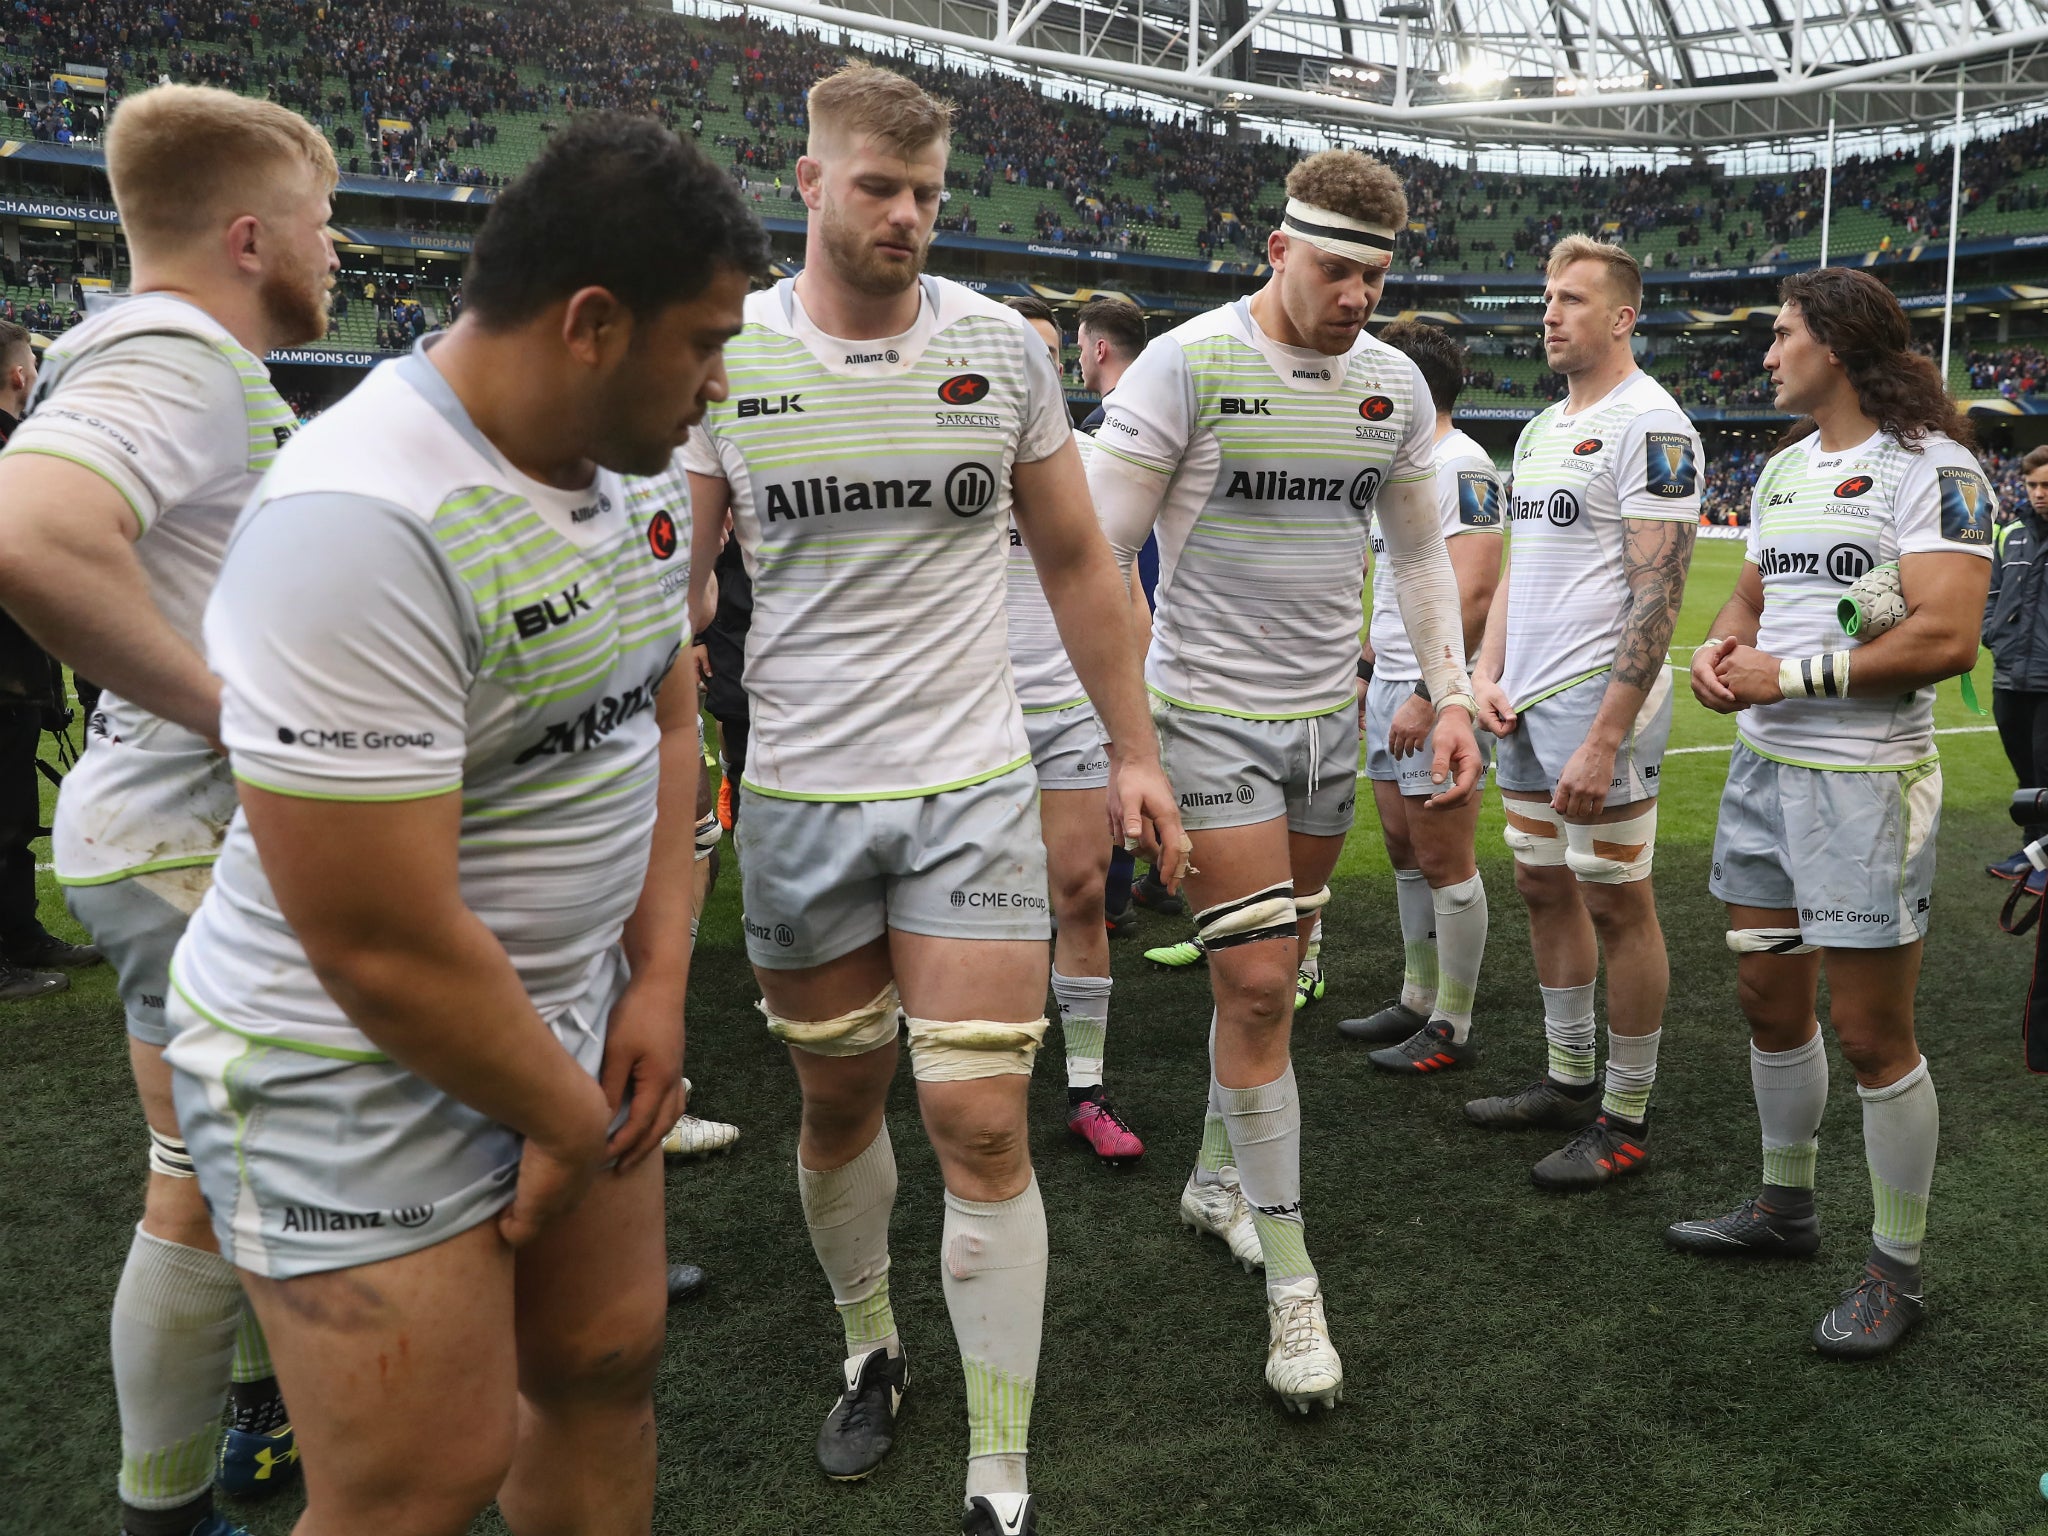 English rugby is suffering in Europe too